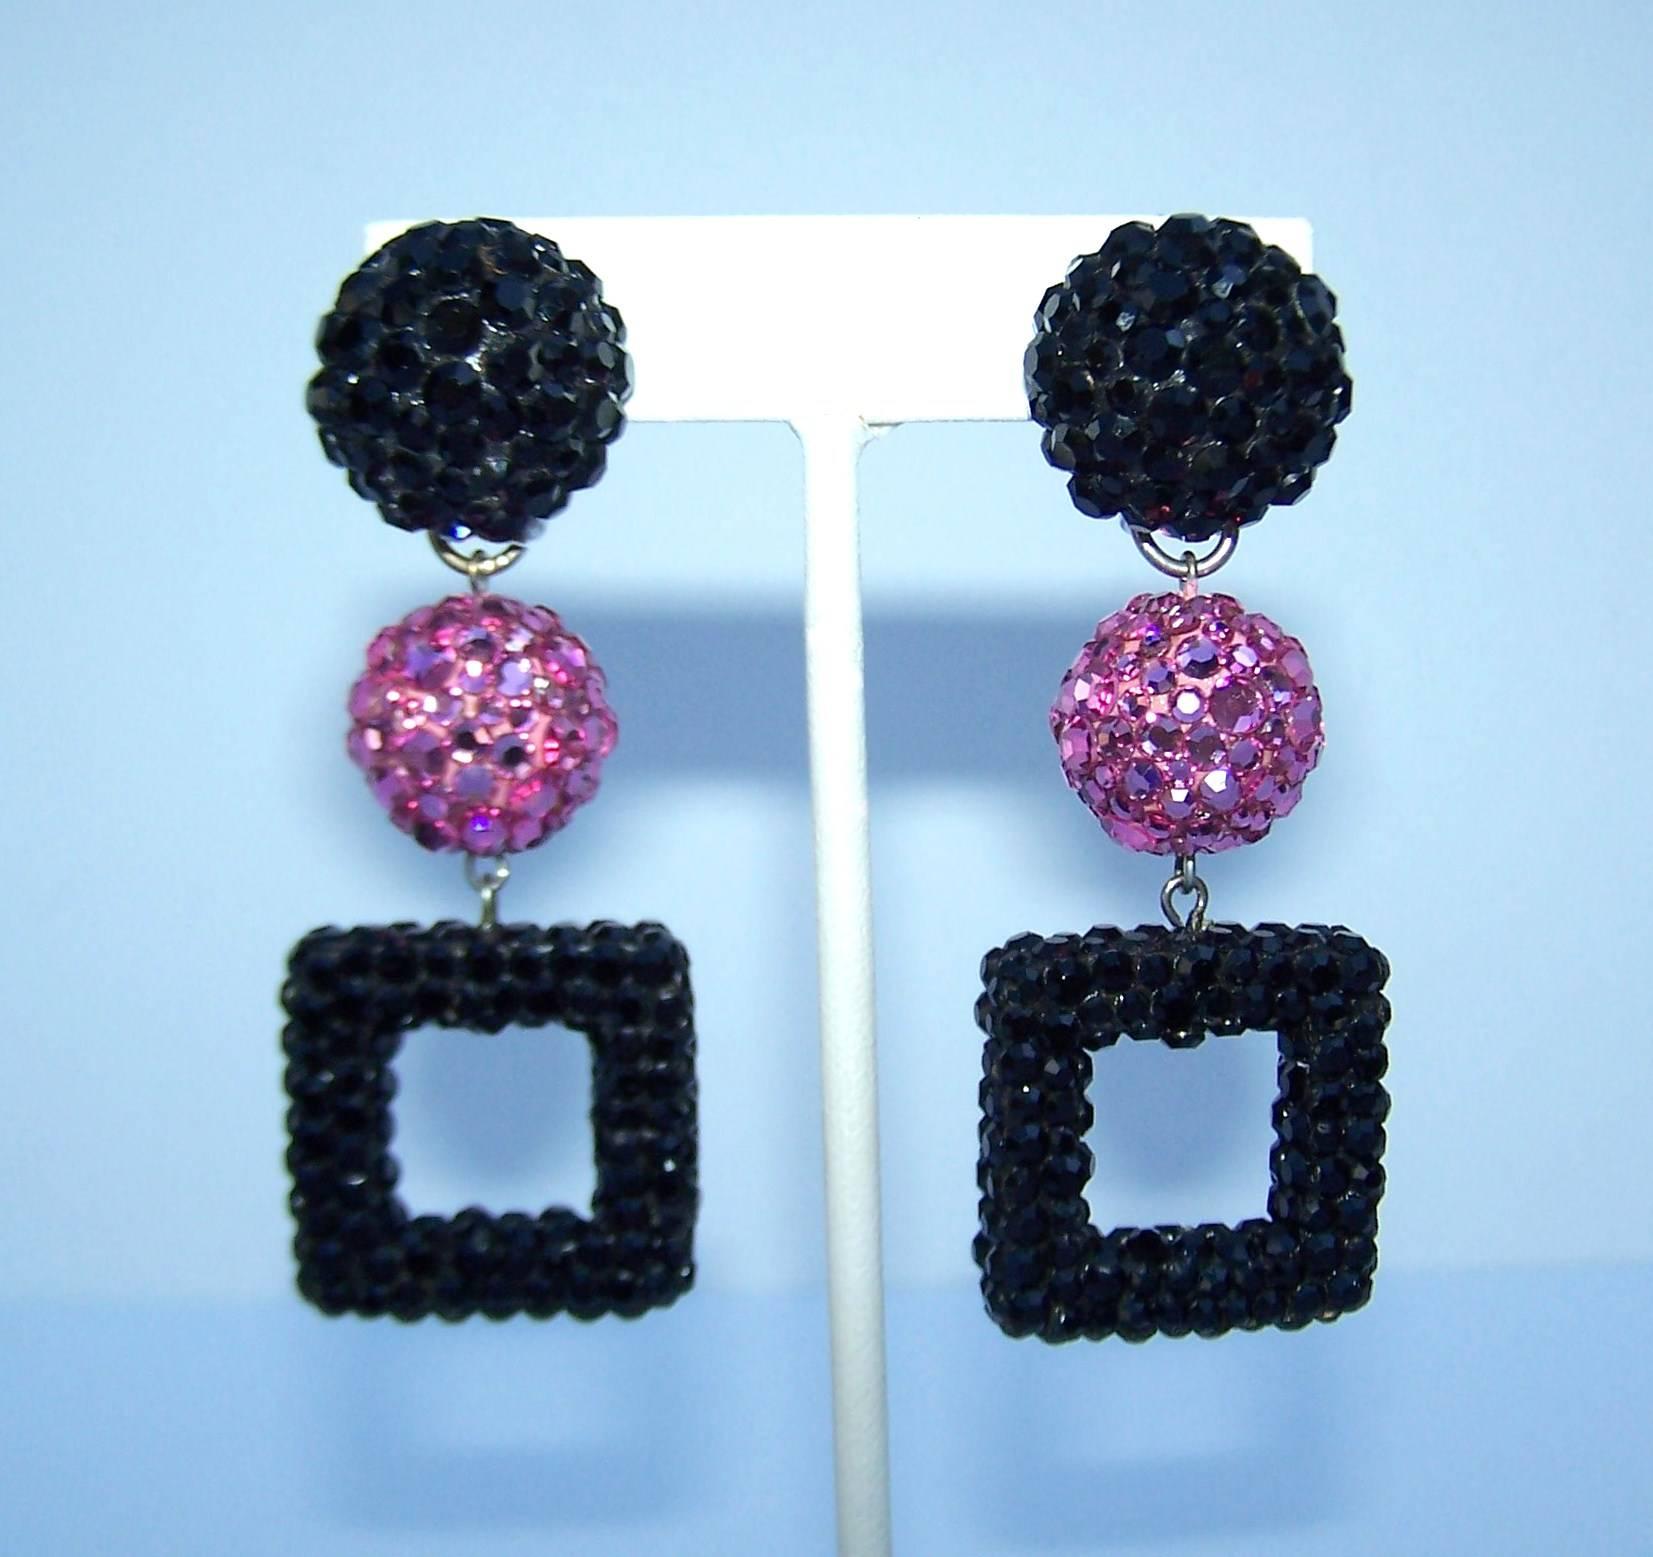 These earrings call for heavy eyeliner, pale pink lips and a mini dress.  Though unmarked, they appear to be a 1980's James Arpad design with a nod to the mod styles of the 1960's.  Black and pink pave crystal encrusted orbs suspend a square drop